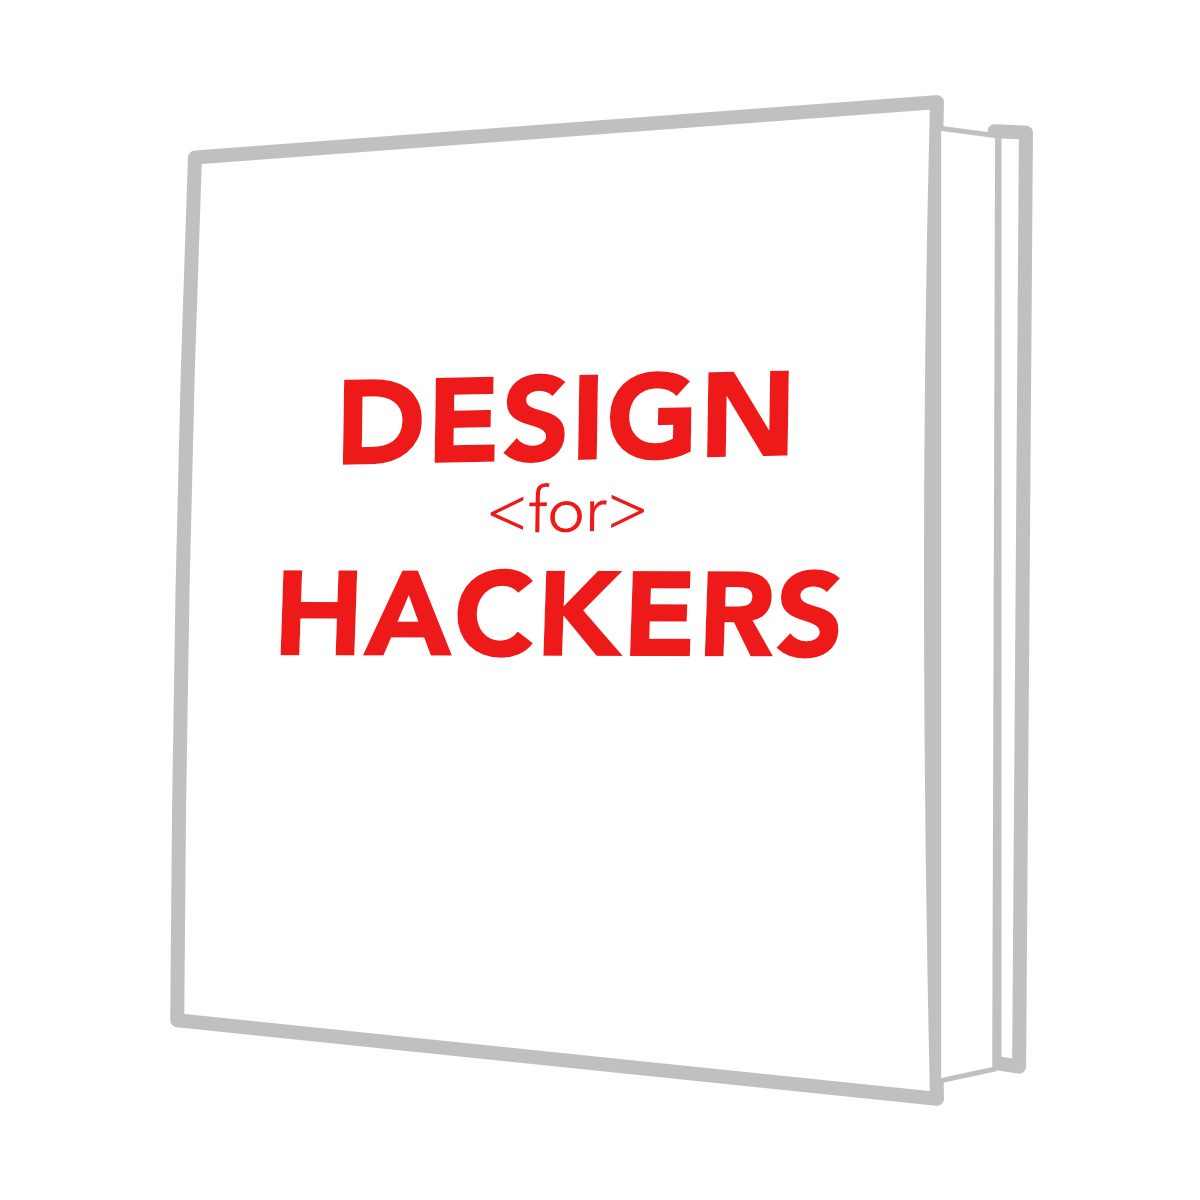 The design for hackers bookcover